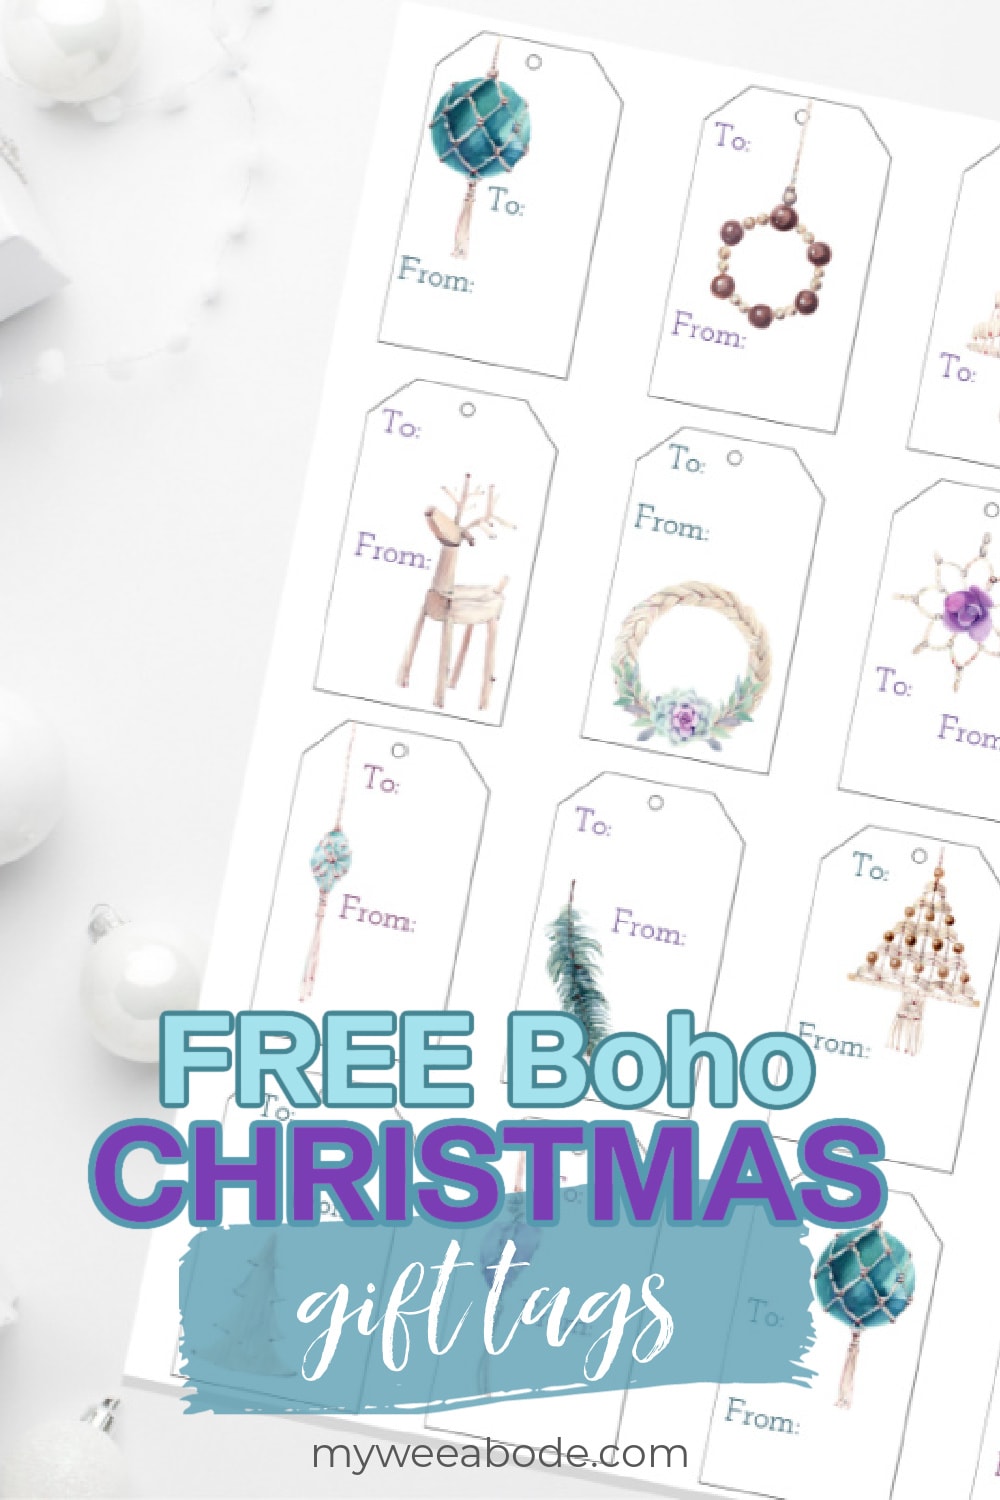 free watercolor boho christmas gift tags with white ornaments and gifts